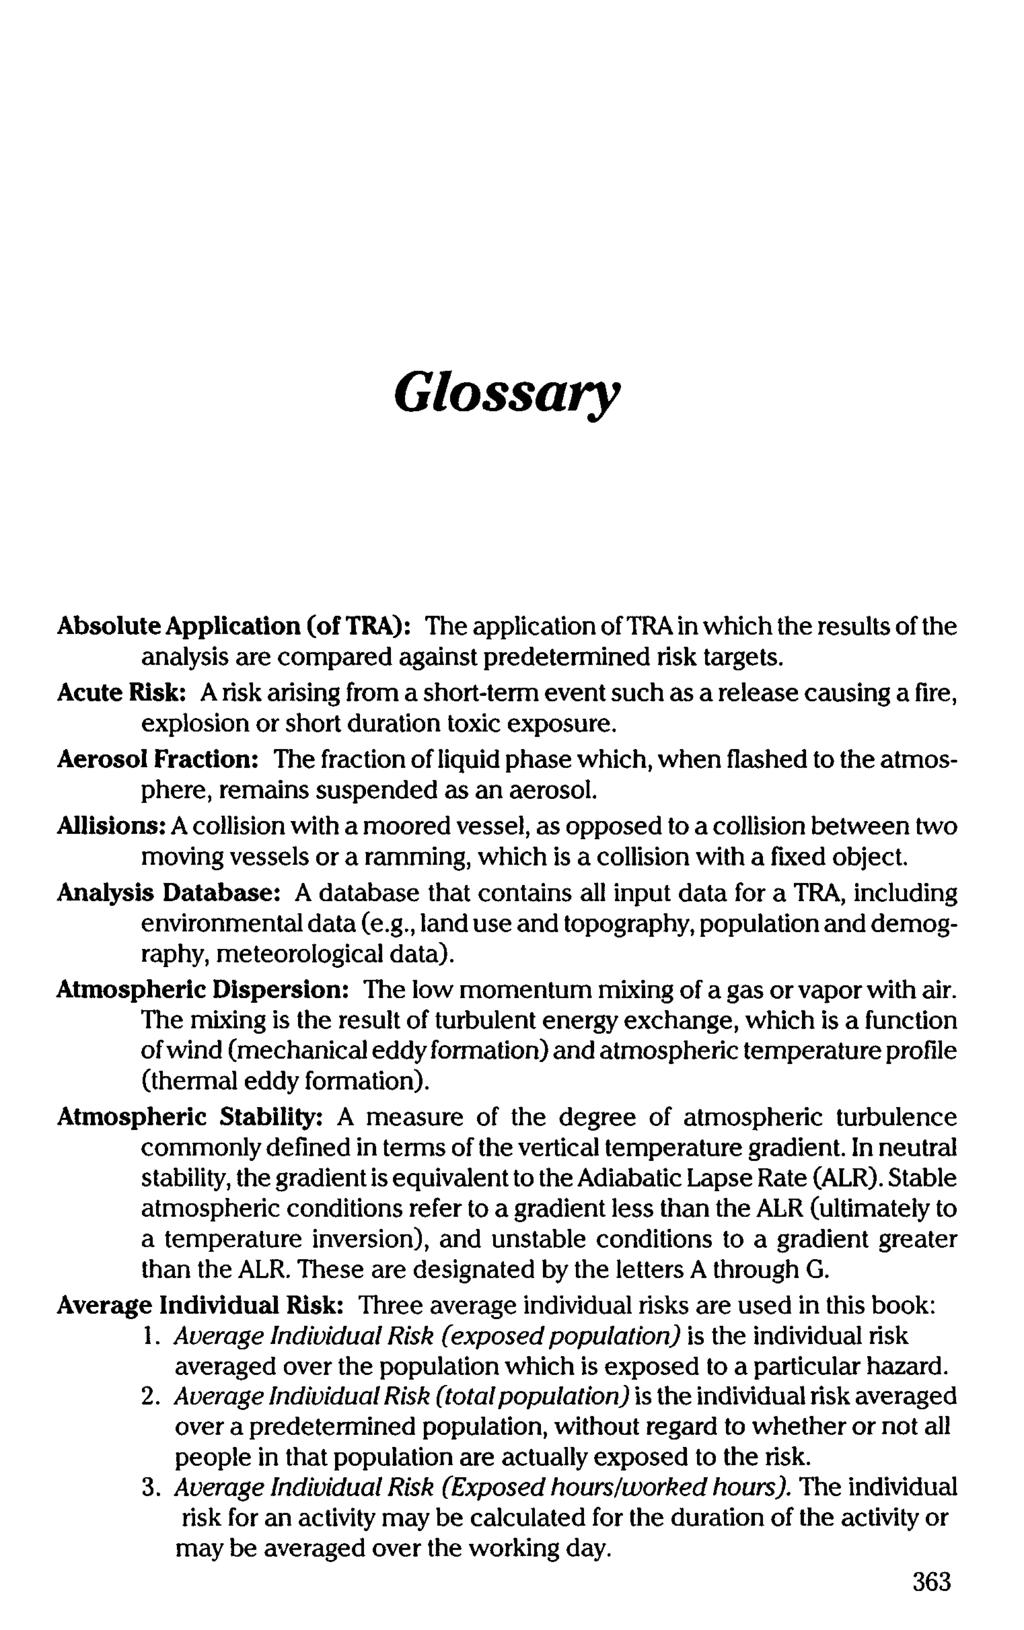 Glossary Absolute Application (of TRA): The application of TRA in which the results of the analysis are compared against predetermined risk targets.